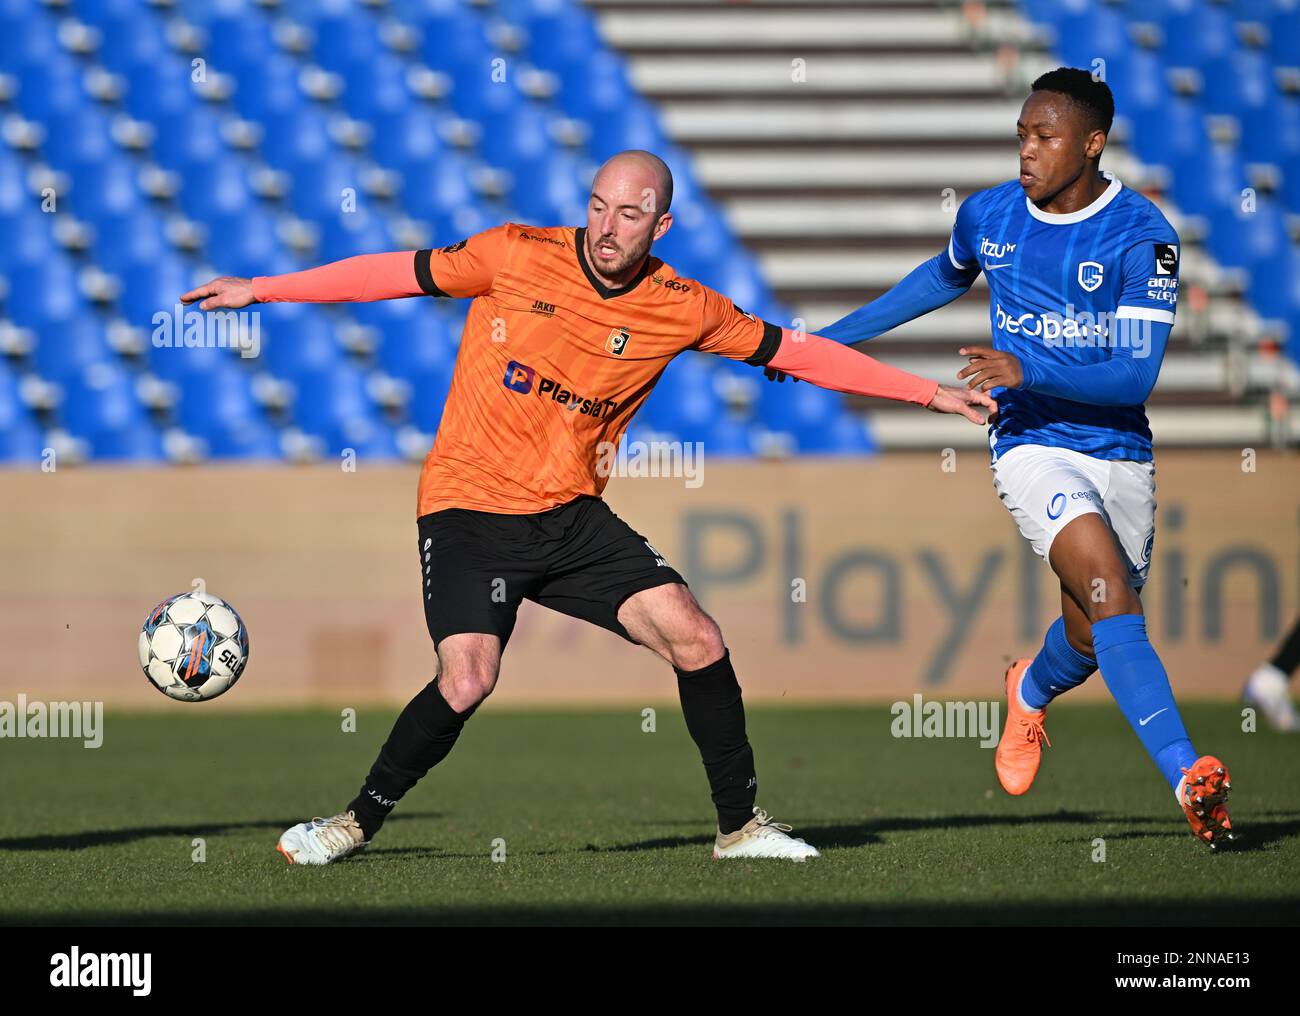 Deinze's Steve De Ridder and Jong Genk's Kelvin Pius John pictured in action during a soccer match between KMSK Deinze and Jong Genk (u23), Saturday 25 February 2023 in Deinze, on day 1 of the Relegation Play-offs of the 2022-2023 'Challenger Pro League' 1B second division of the Belgian championship. BELGA PHOTO DAVID CATRY Stock Photo